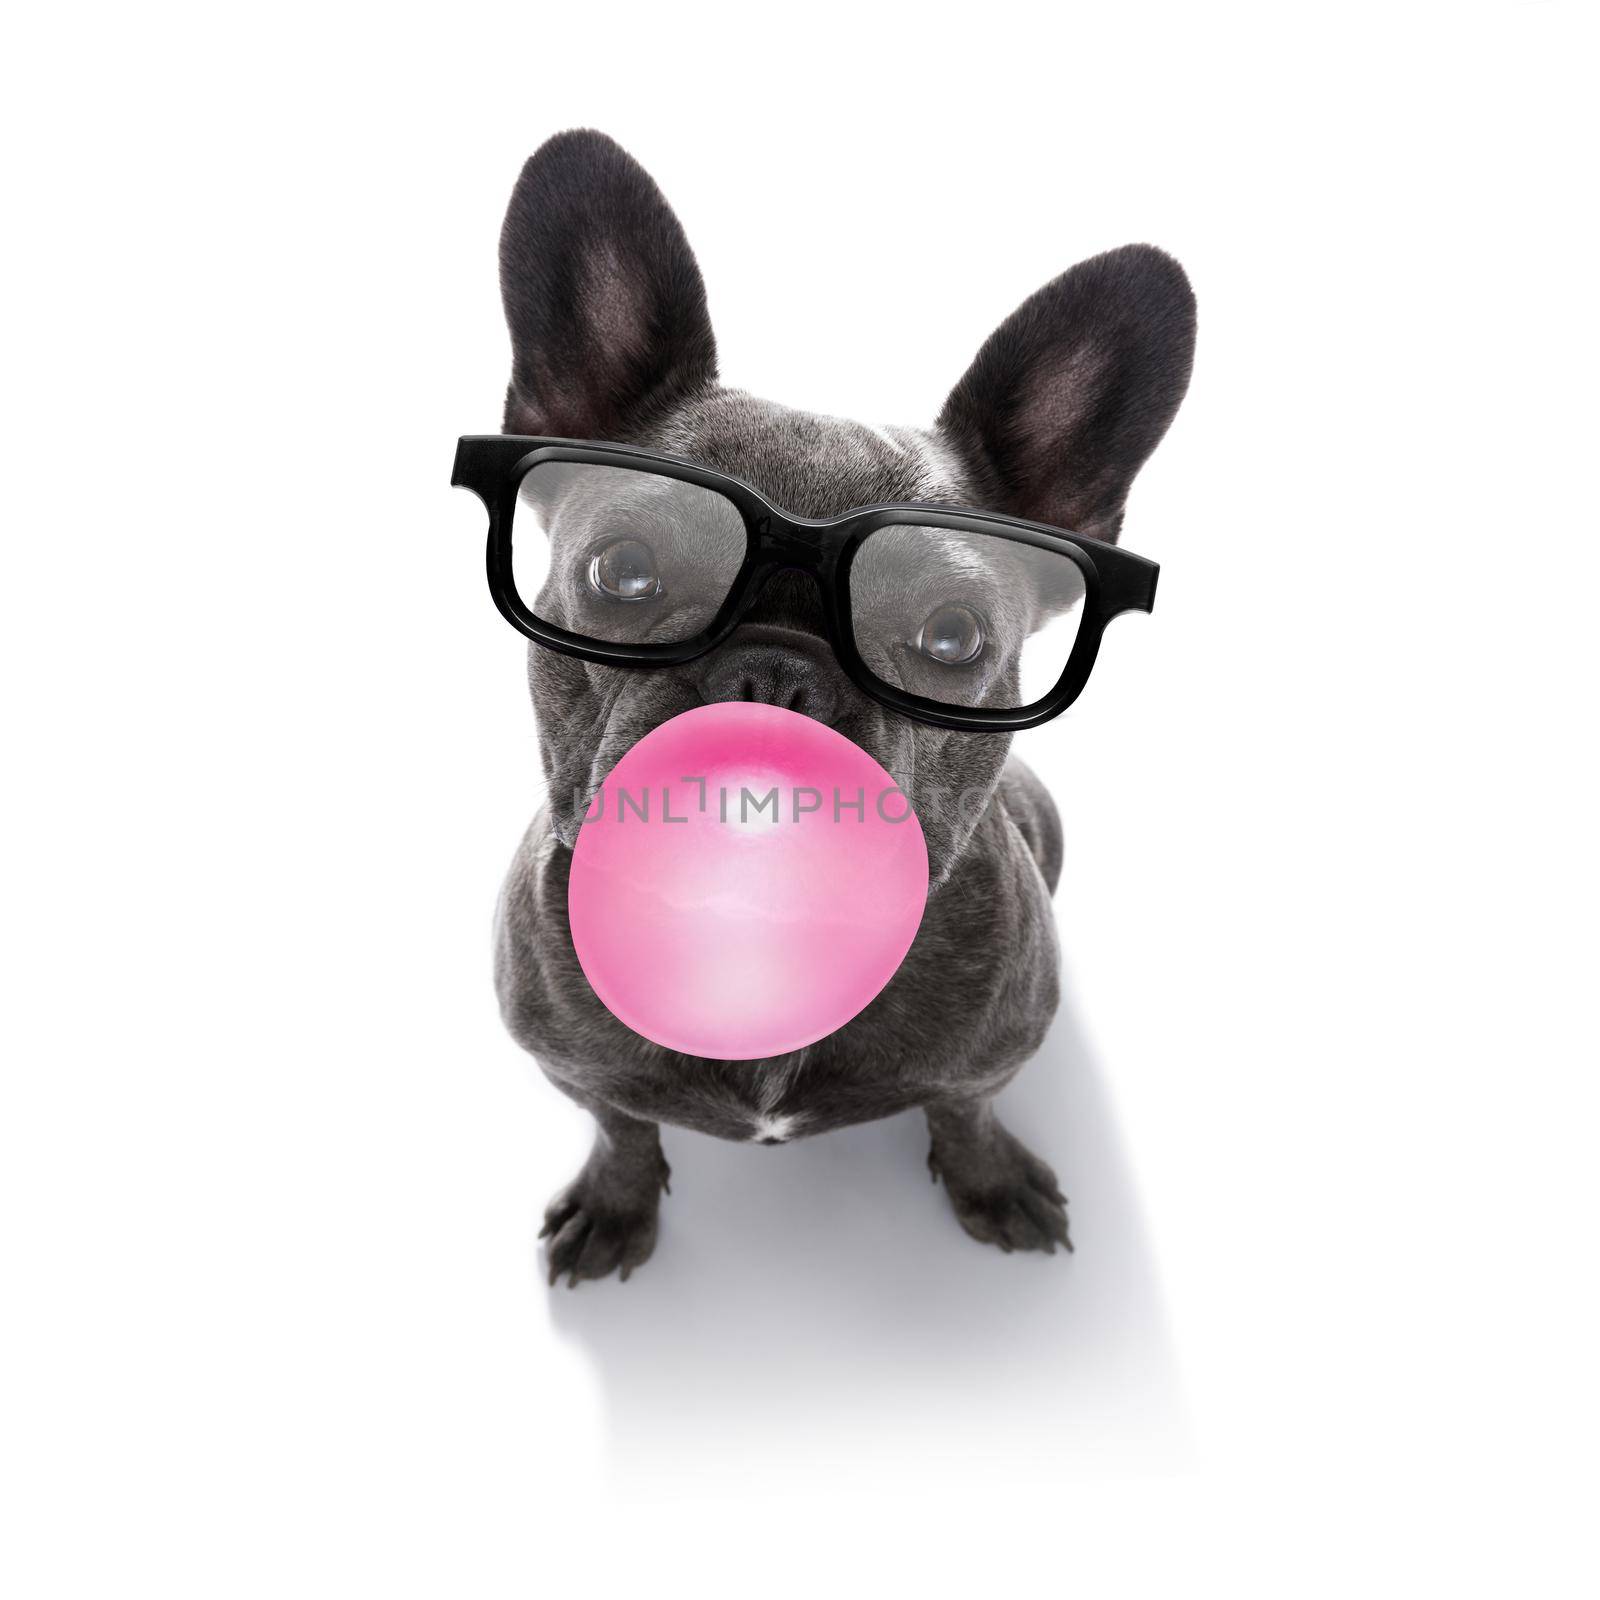 curious french bulldog dog looking up to owner waiting or sitting patient to play or go for a walk with  chewing bubble gum and reading sunglasses   isolated on white background